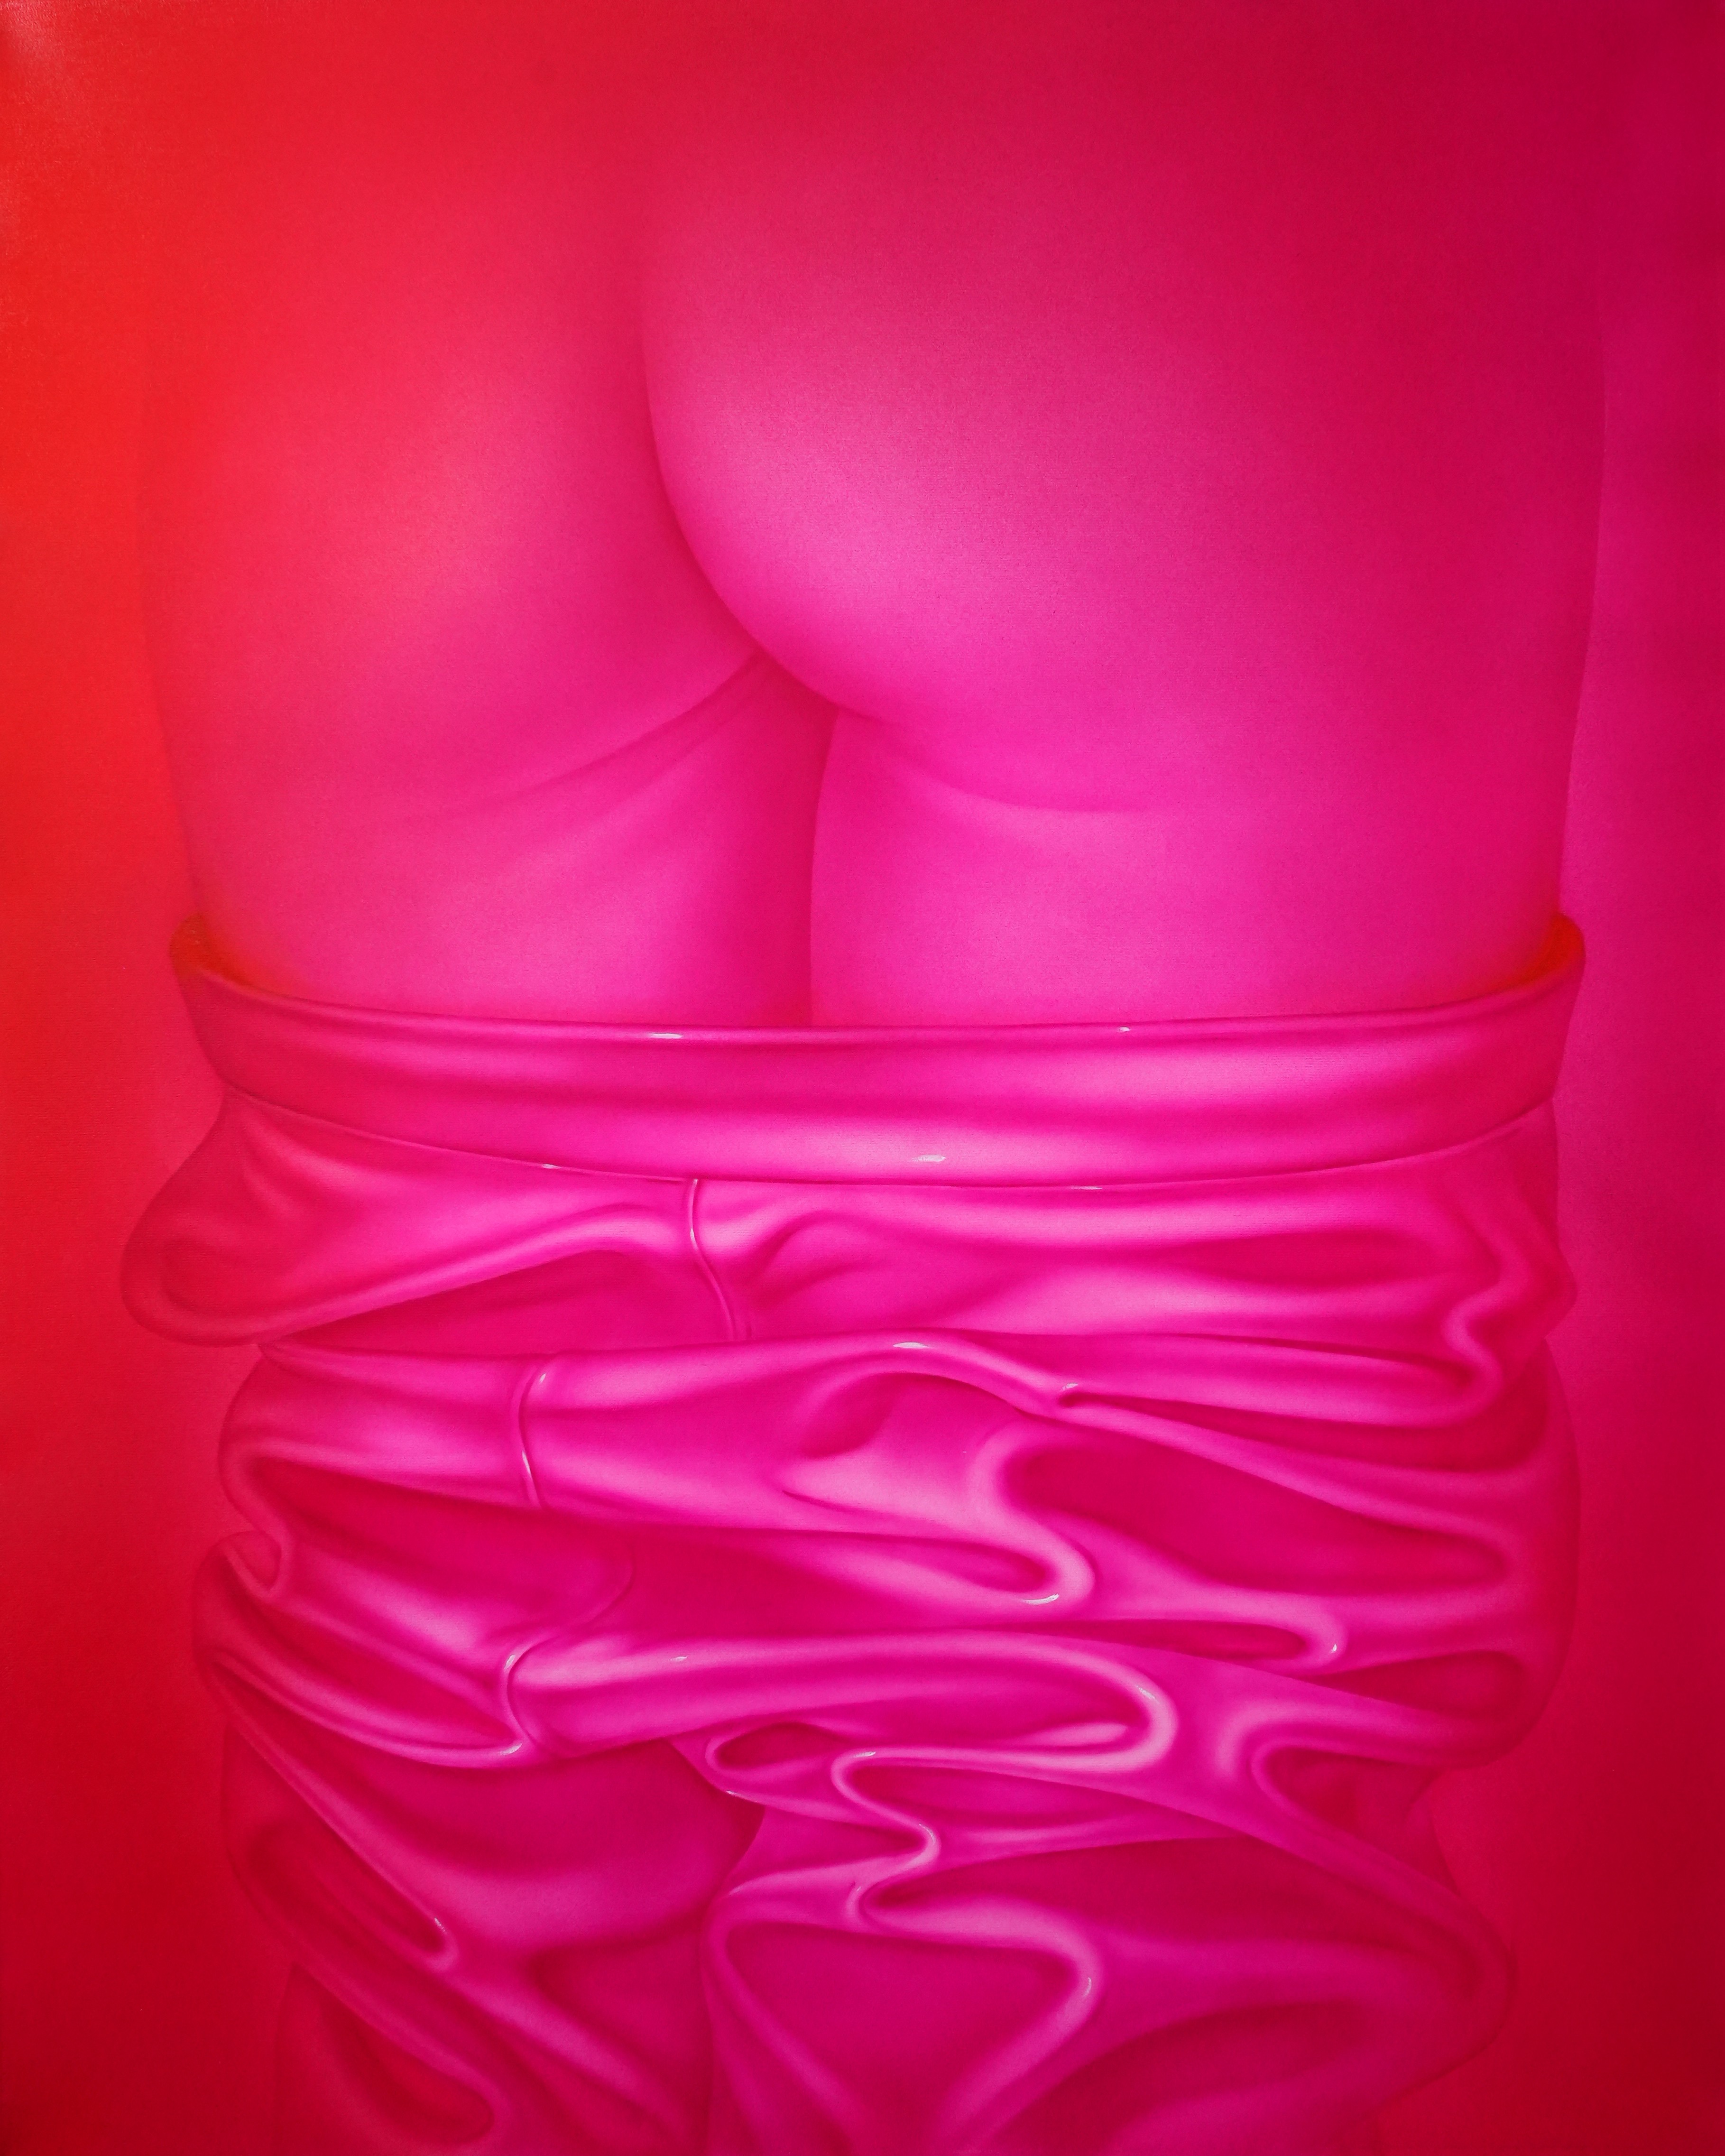 a pink painting depicting PVC trousers pulled down in folds, exposing a nude bottom